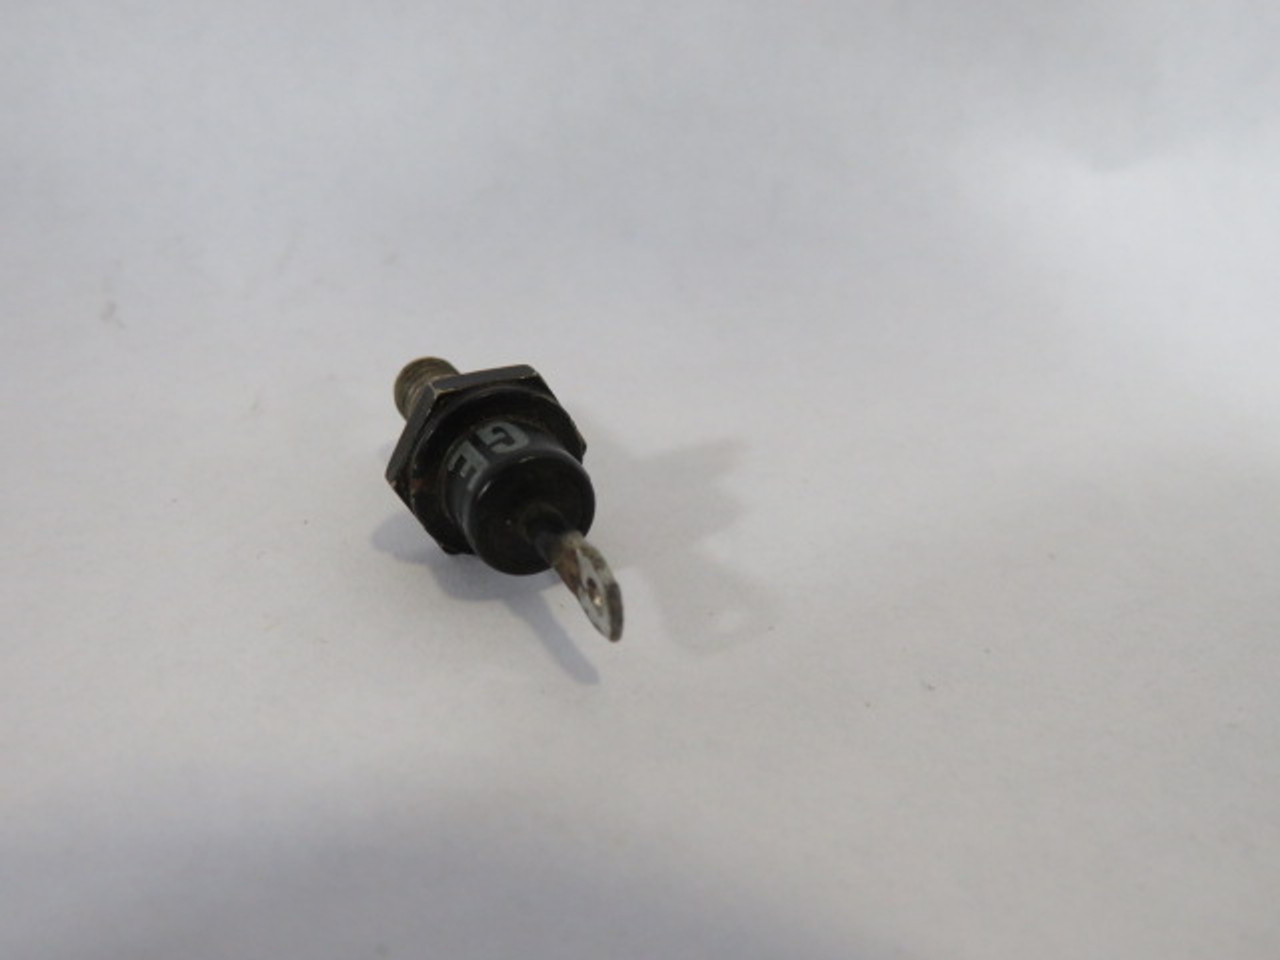 General Electric 1N1206A Med Power Silicon Rectifier Diode 12A 600/420V USED